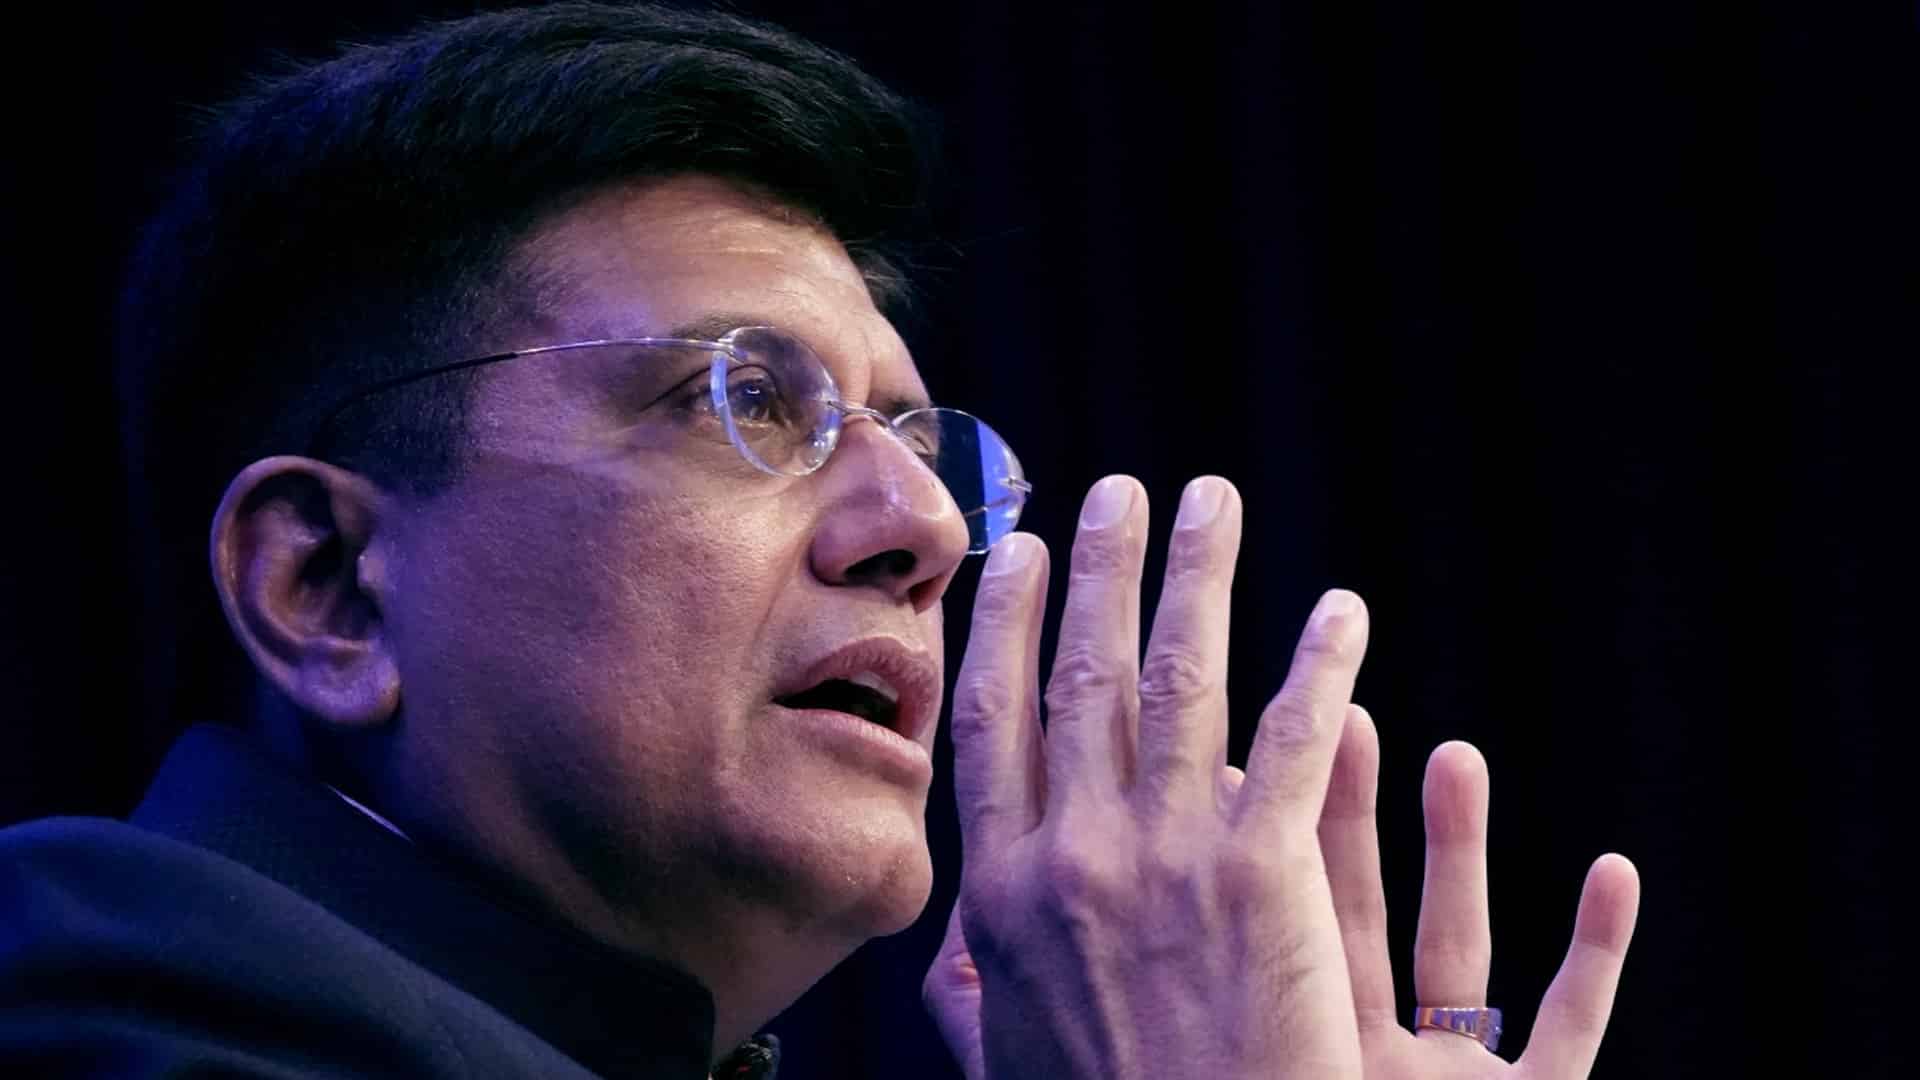 Unfortunately, WTO could not respond with alacrity to control COVID-19 pandemic: Goyal